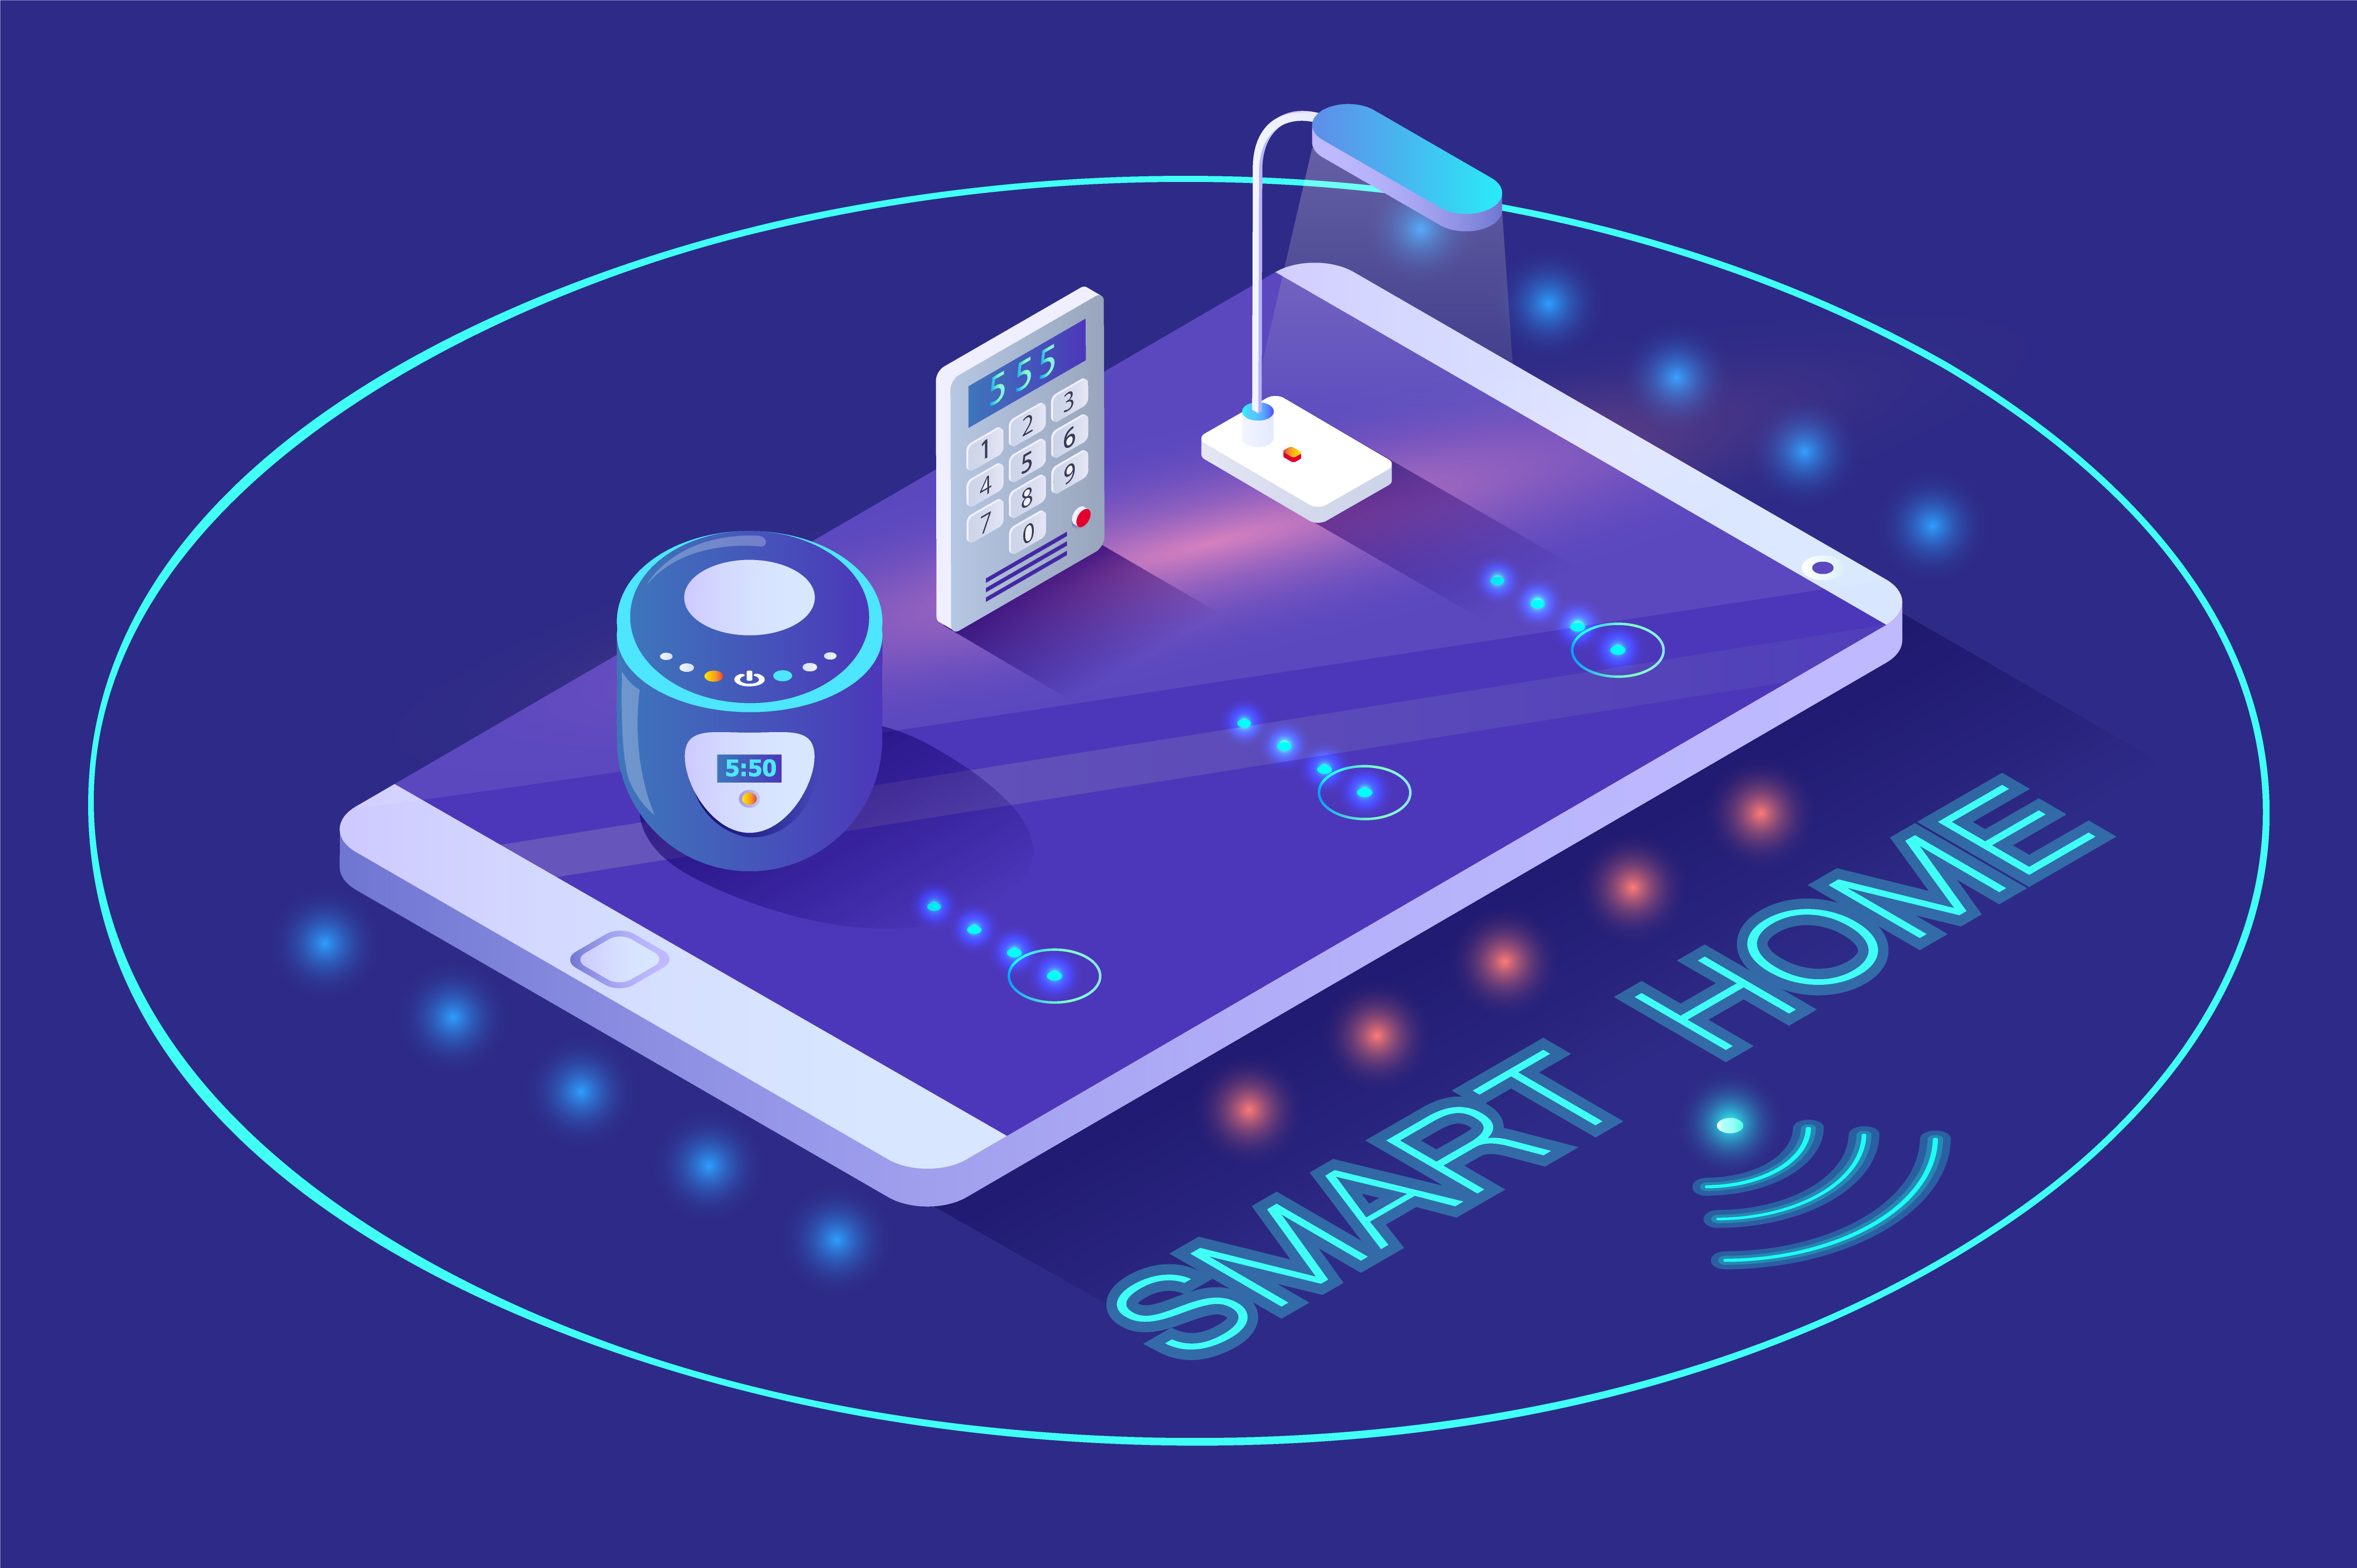 Smart home wireless device lamp and intercom electronic equipment on touchscreen phone in neon circle. Connection with online safety technology light and smart key on mobile secure gadget, isometric. Wireless Device Smart Automated Equipment Vector